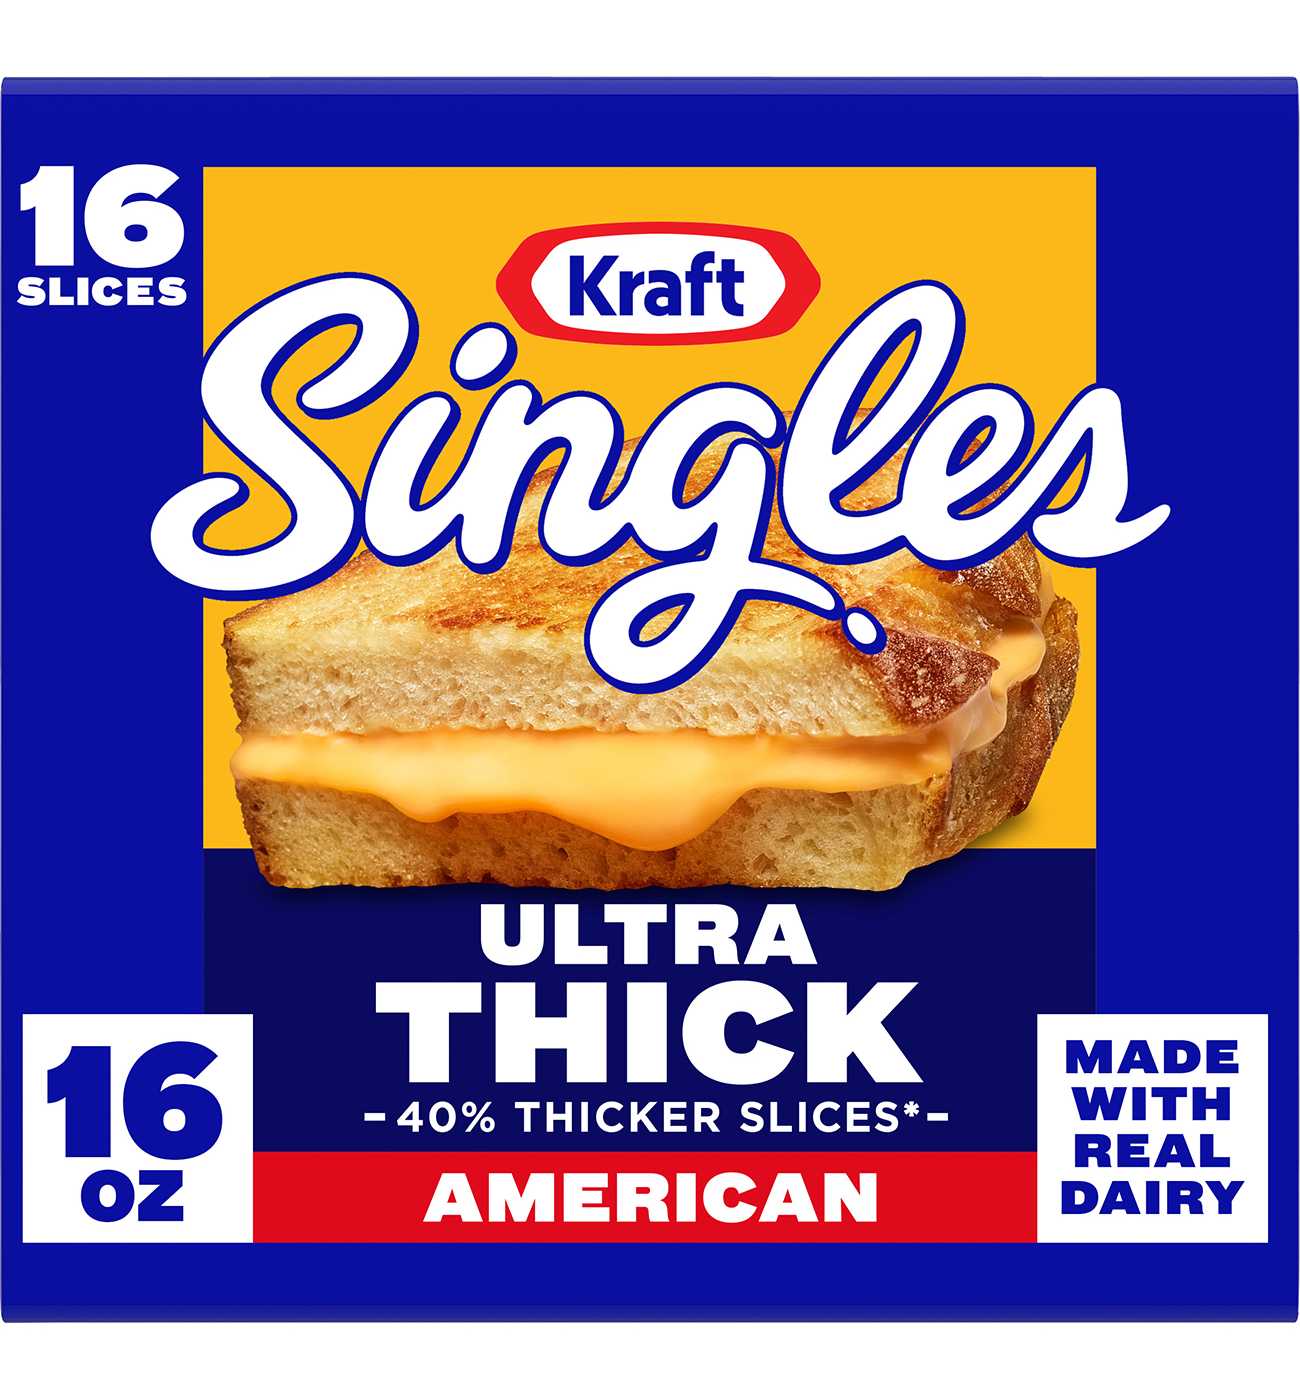 Kraft Singles American Ultra Thick Sliced Cheese; image 1 of 3